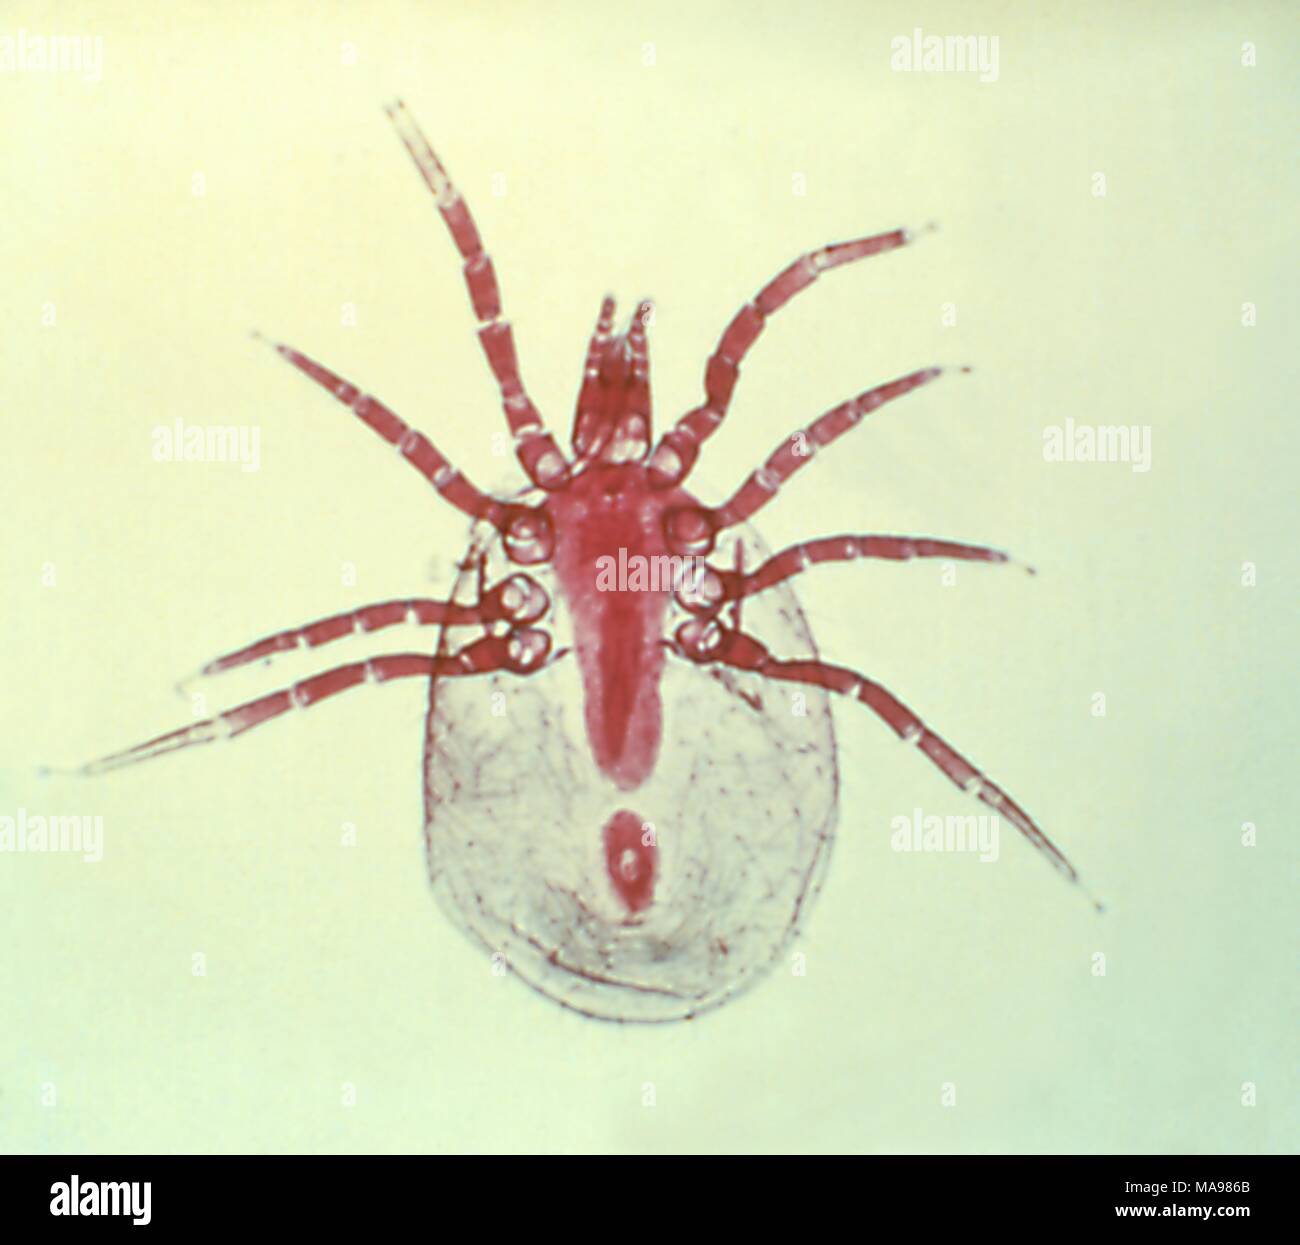 Mite, a member of the Class Arachnida, and the Order Acari, 1972. Image courtesy Centers for Disease Control (CDC). () Stock Photo